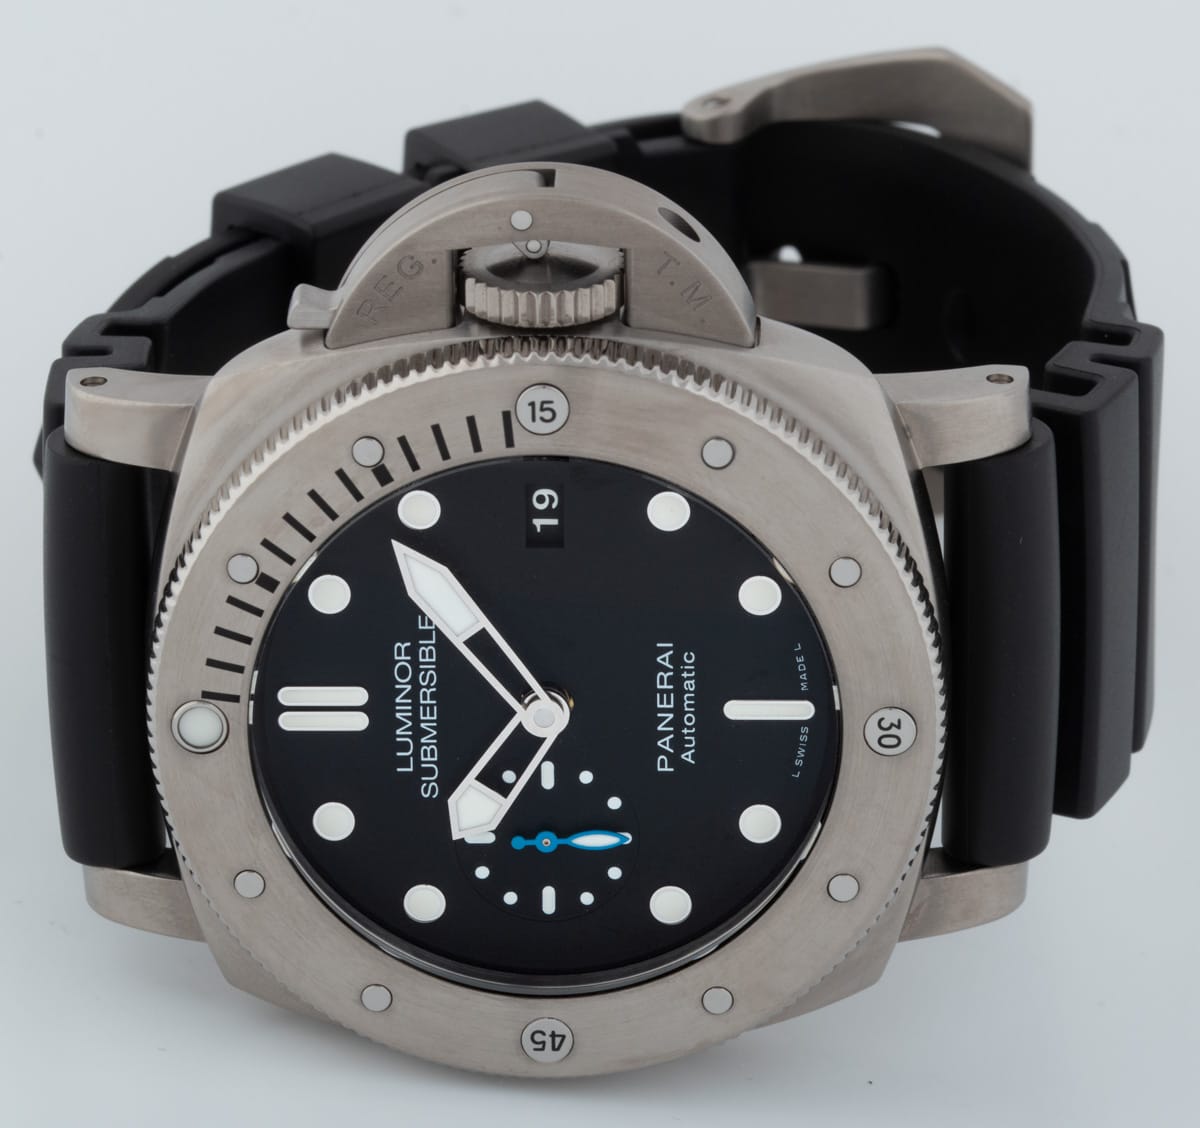 Front View of Luminor Submersible 1950 3 Days Titanio